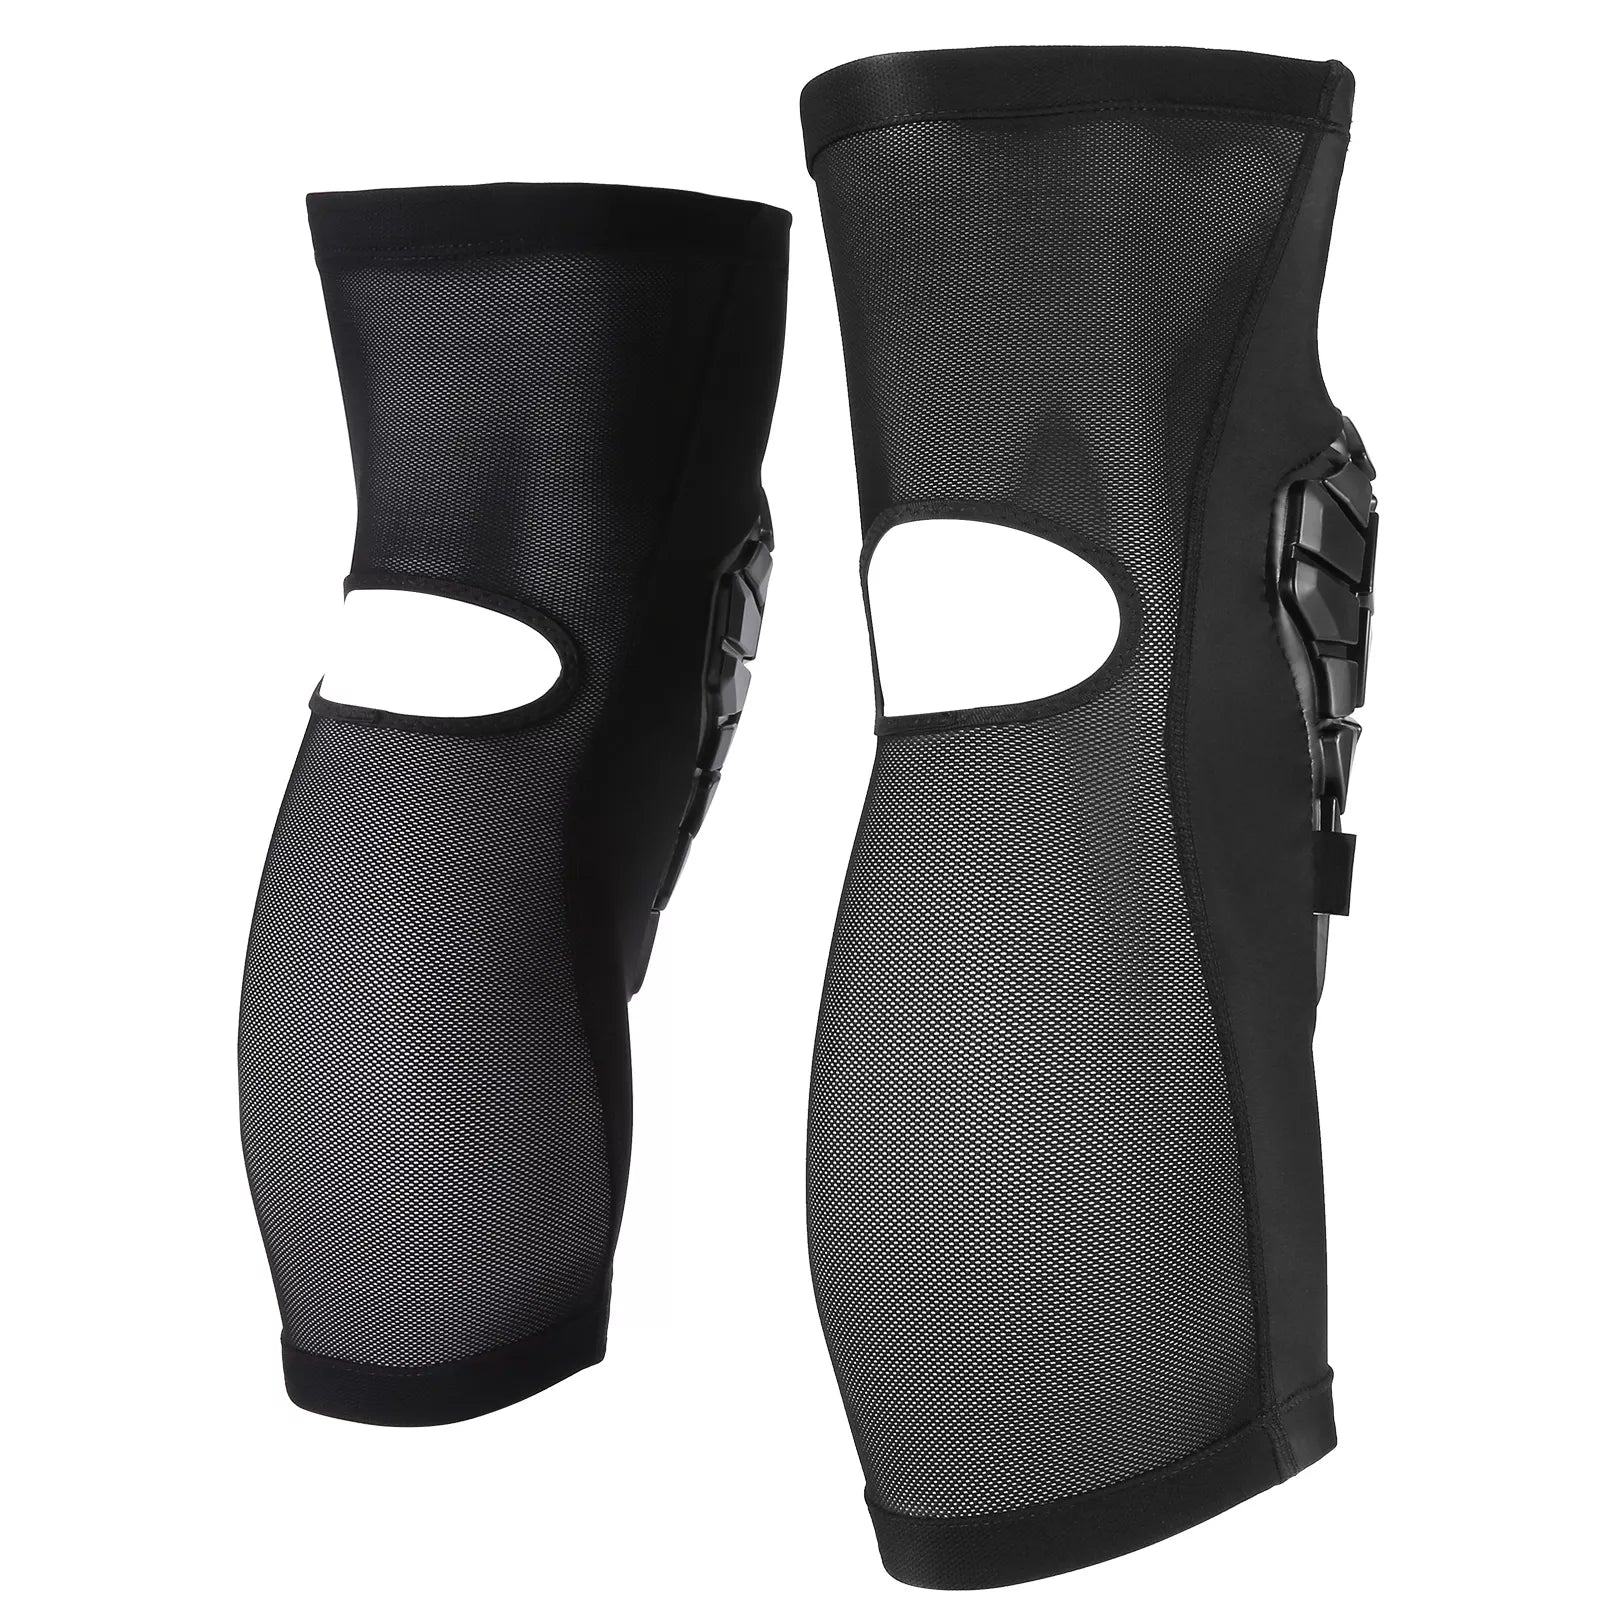 The Kupro Professional Cycling Knee Pads, made from impact-dispersing KUPRO polymer, feature breathable Lycra and Yishuang mesh for comfort. Weighing 0.36kg, they have anti-slip strips for stability and an open design for flexible movement and ventilation. Priced at $45, they meet EU CE EN1621-1 standards, ensuring reliable protection during exercise.Standard features of electric bicycles